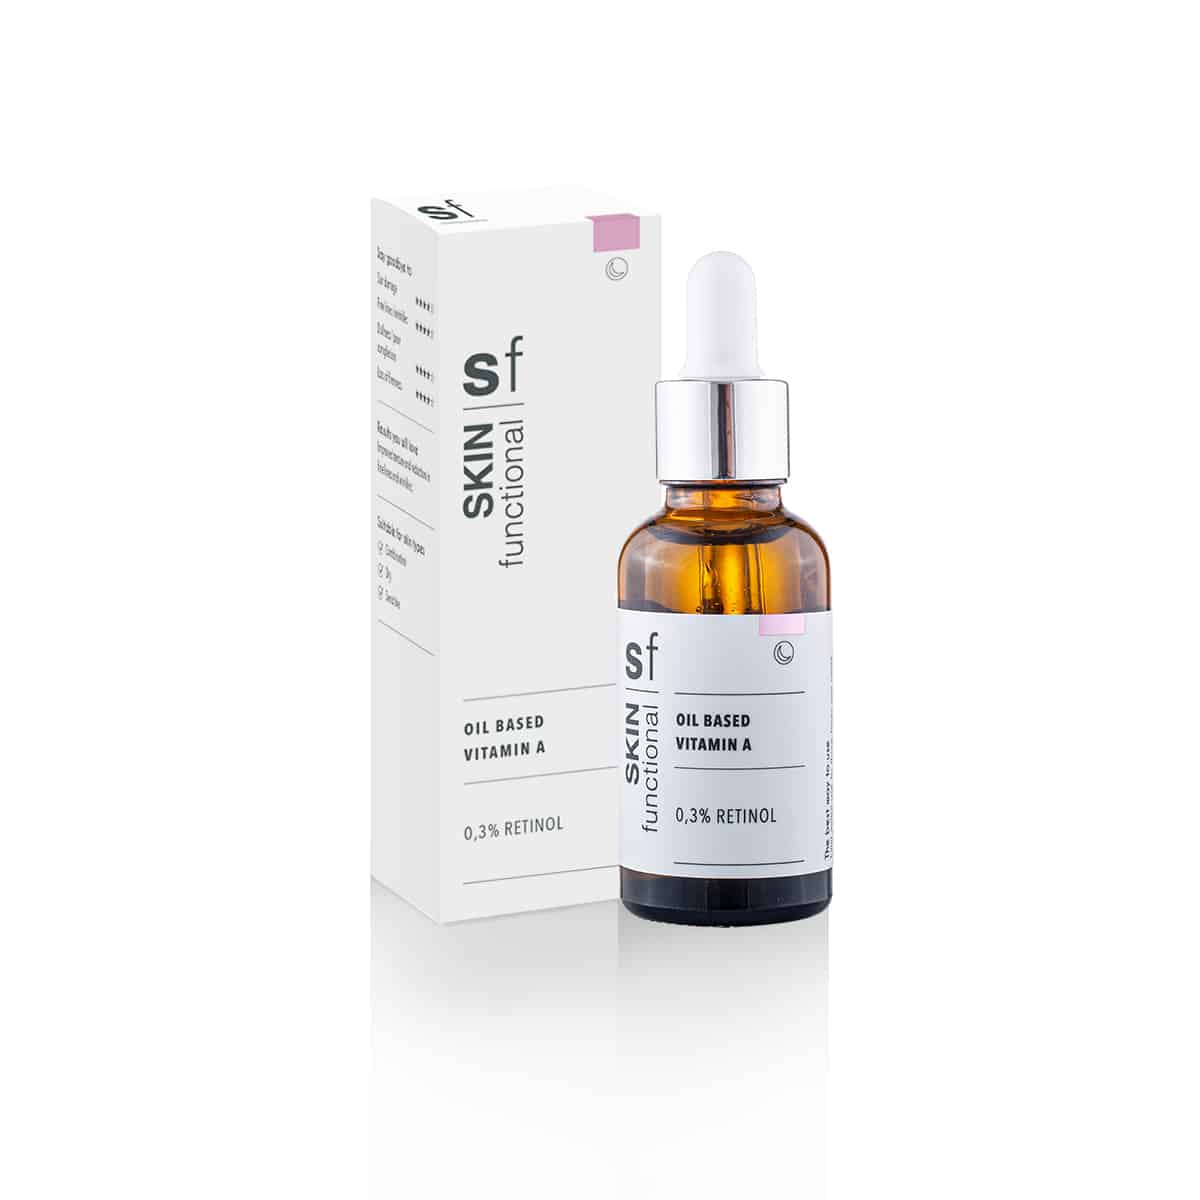 A bottle of SKIN Functional - 0.3% Retinol - Oil Based Vitamin A on a white background.